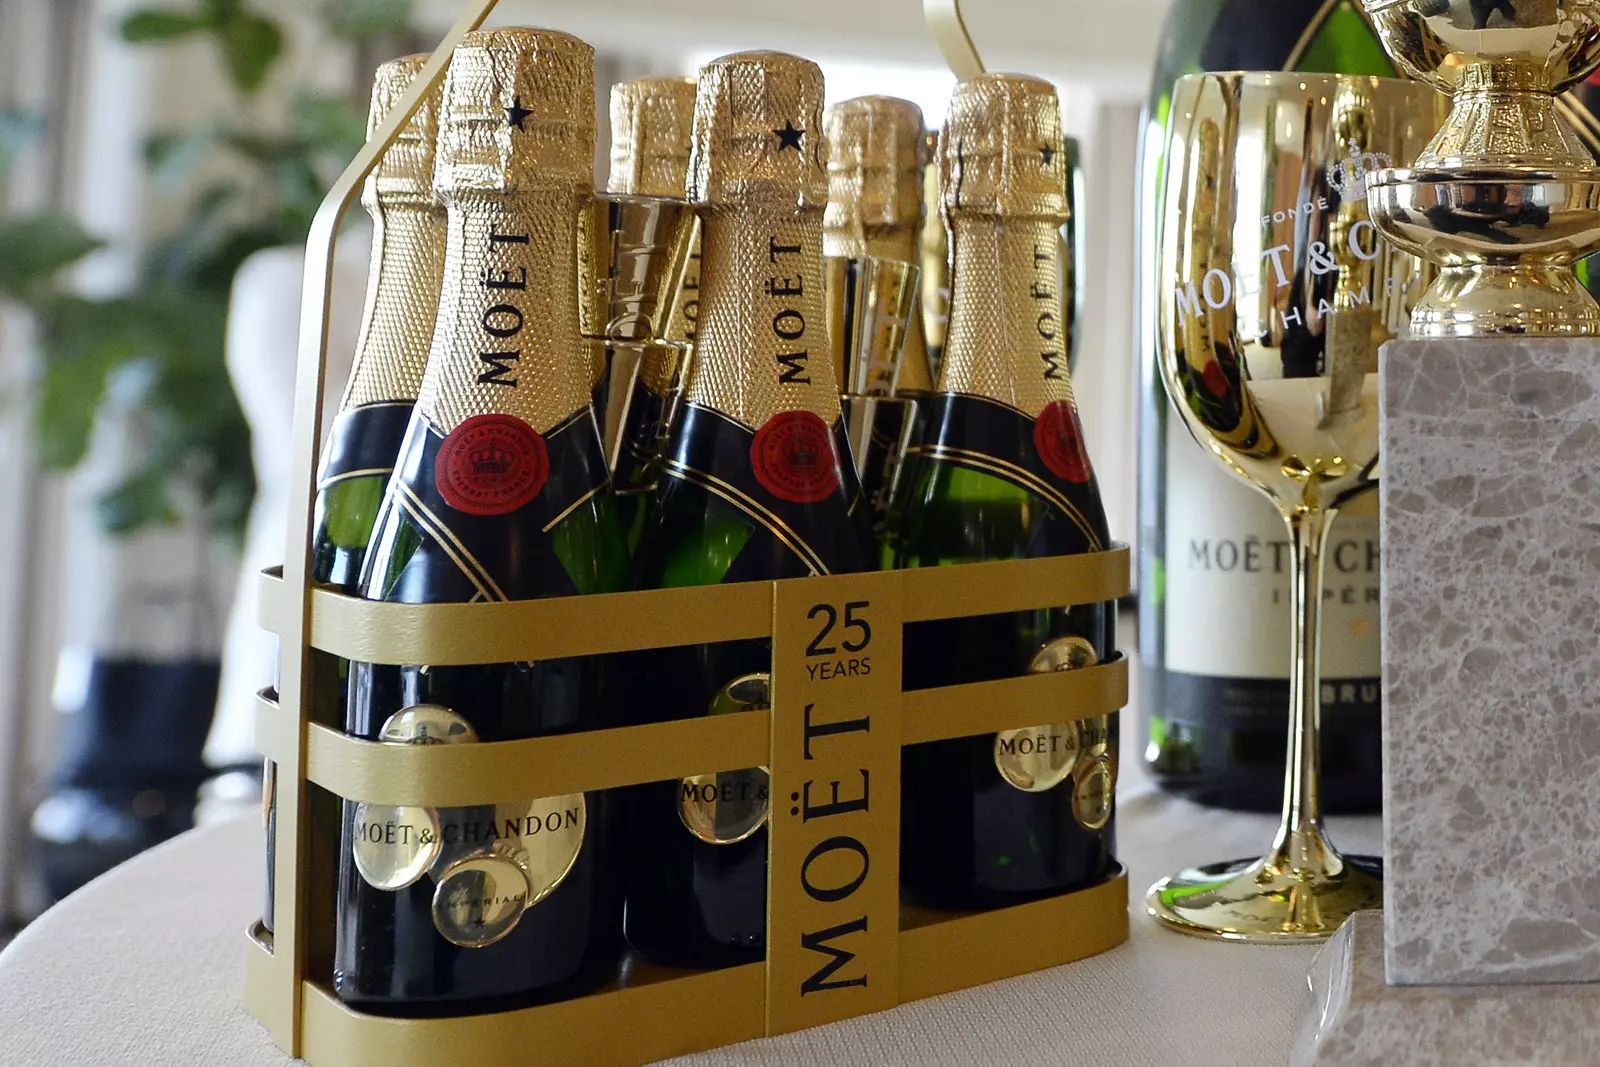 Moët & Chandon Champagne Six-Packs Are Here to Class up Your Summer